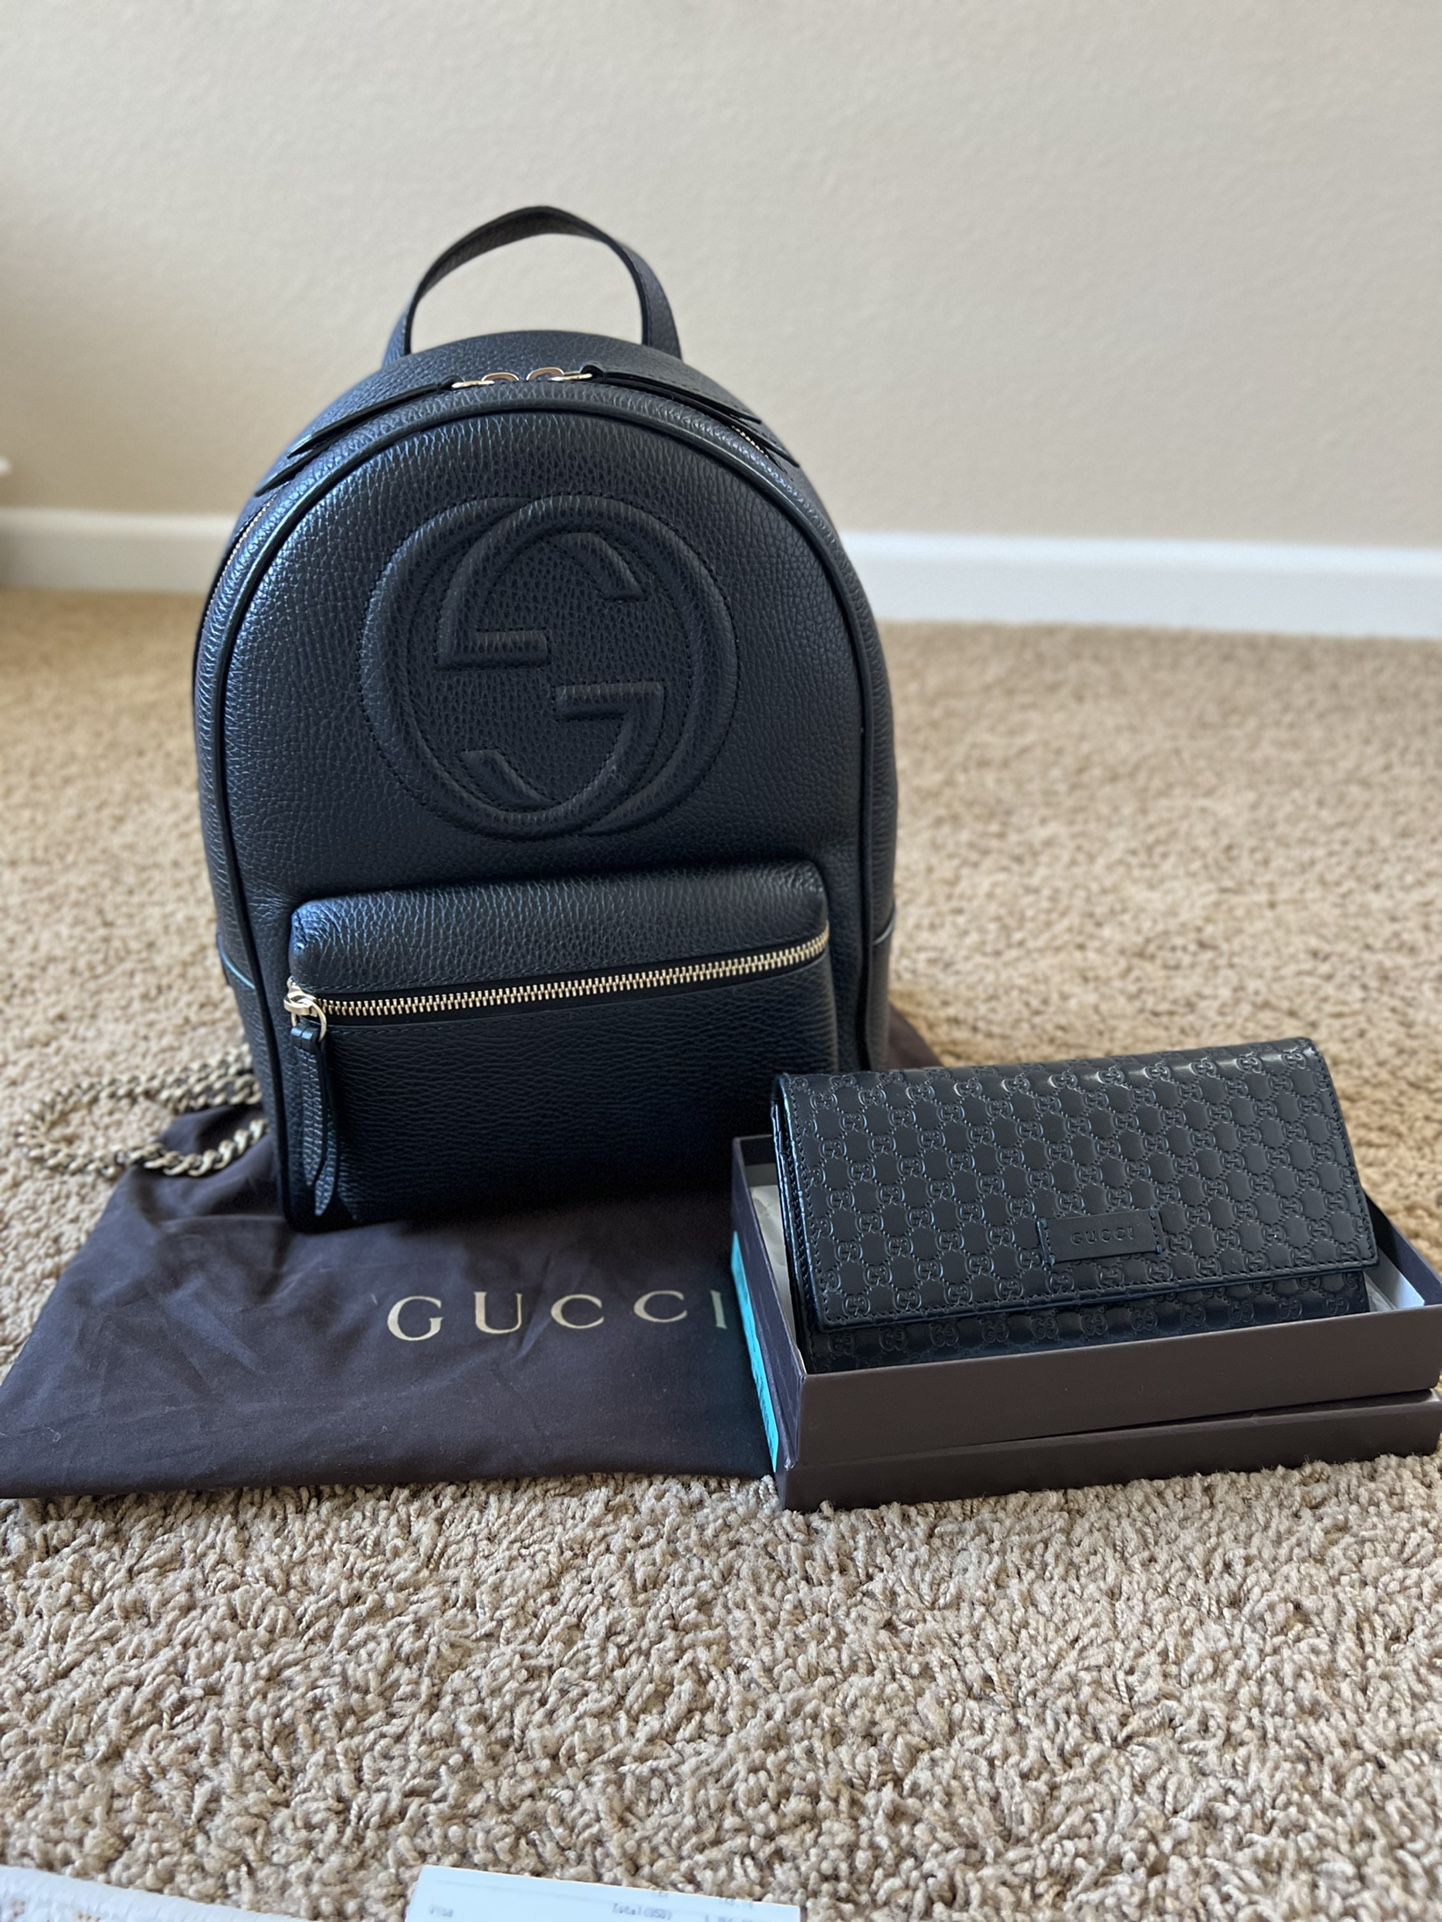 Gucci Soho Backpack & Wallet-authentic 